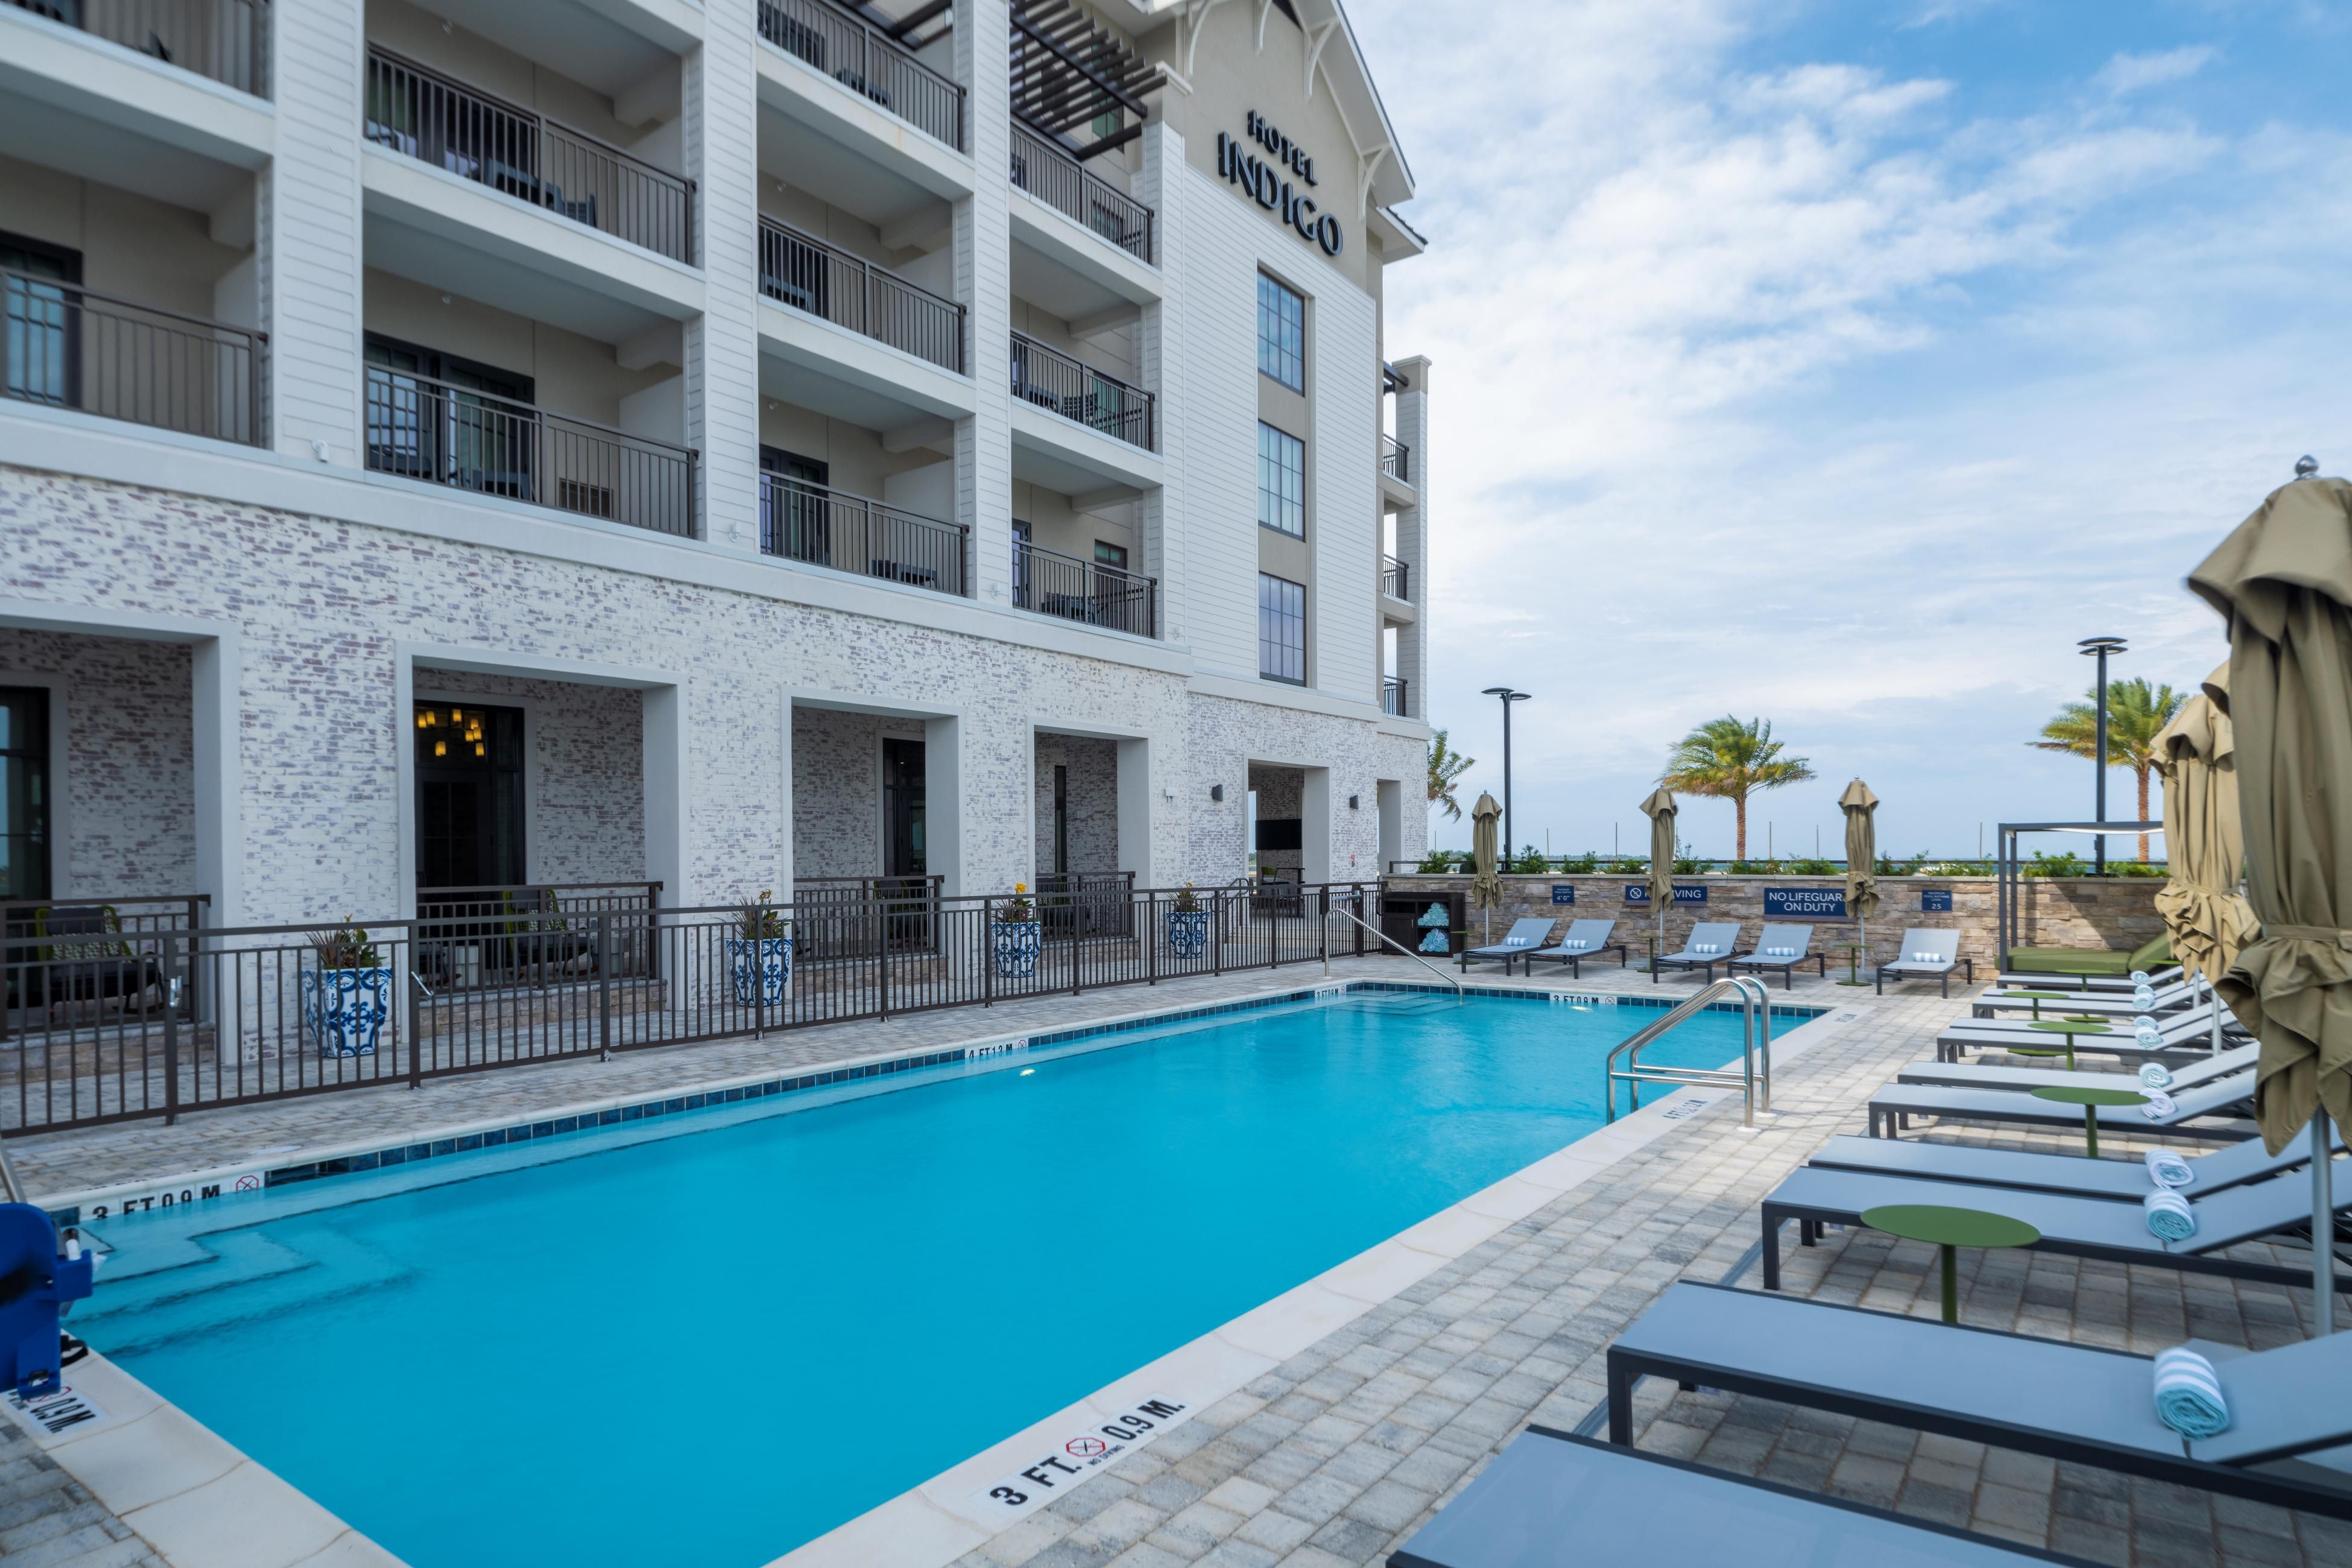 Experience our serene waterside pool with a sun deck and picturesque views of St. Andrew Bay. While you bask in the Florida sunshine, enjoy a snack and beverage from Tarpons restaurant served at the poolside. As the sun sets, sit by the firepit and enjoy the coastal ambiance. Our pool is open from 8:00 a.m. to 10:00 p.m.